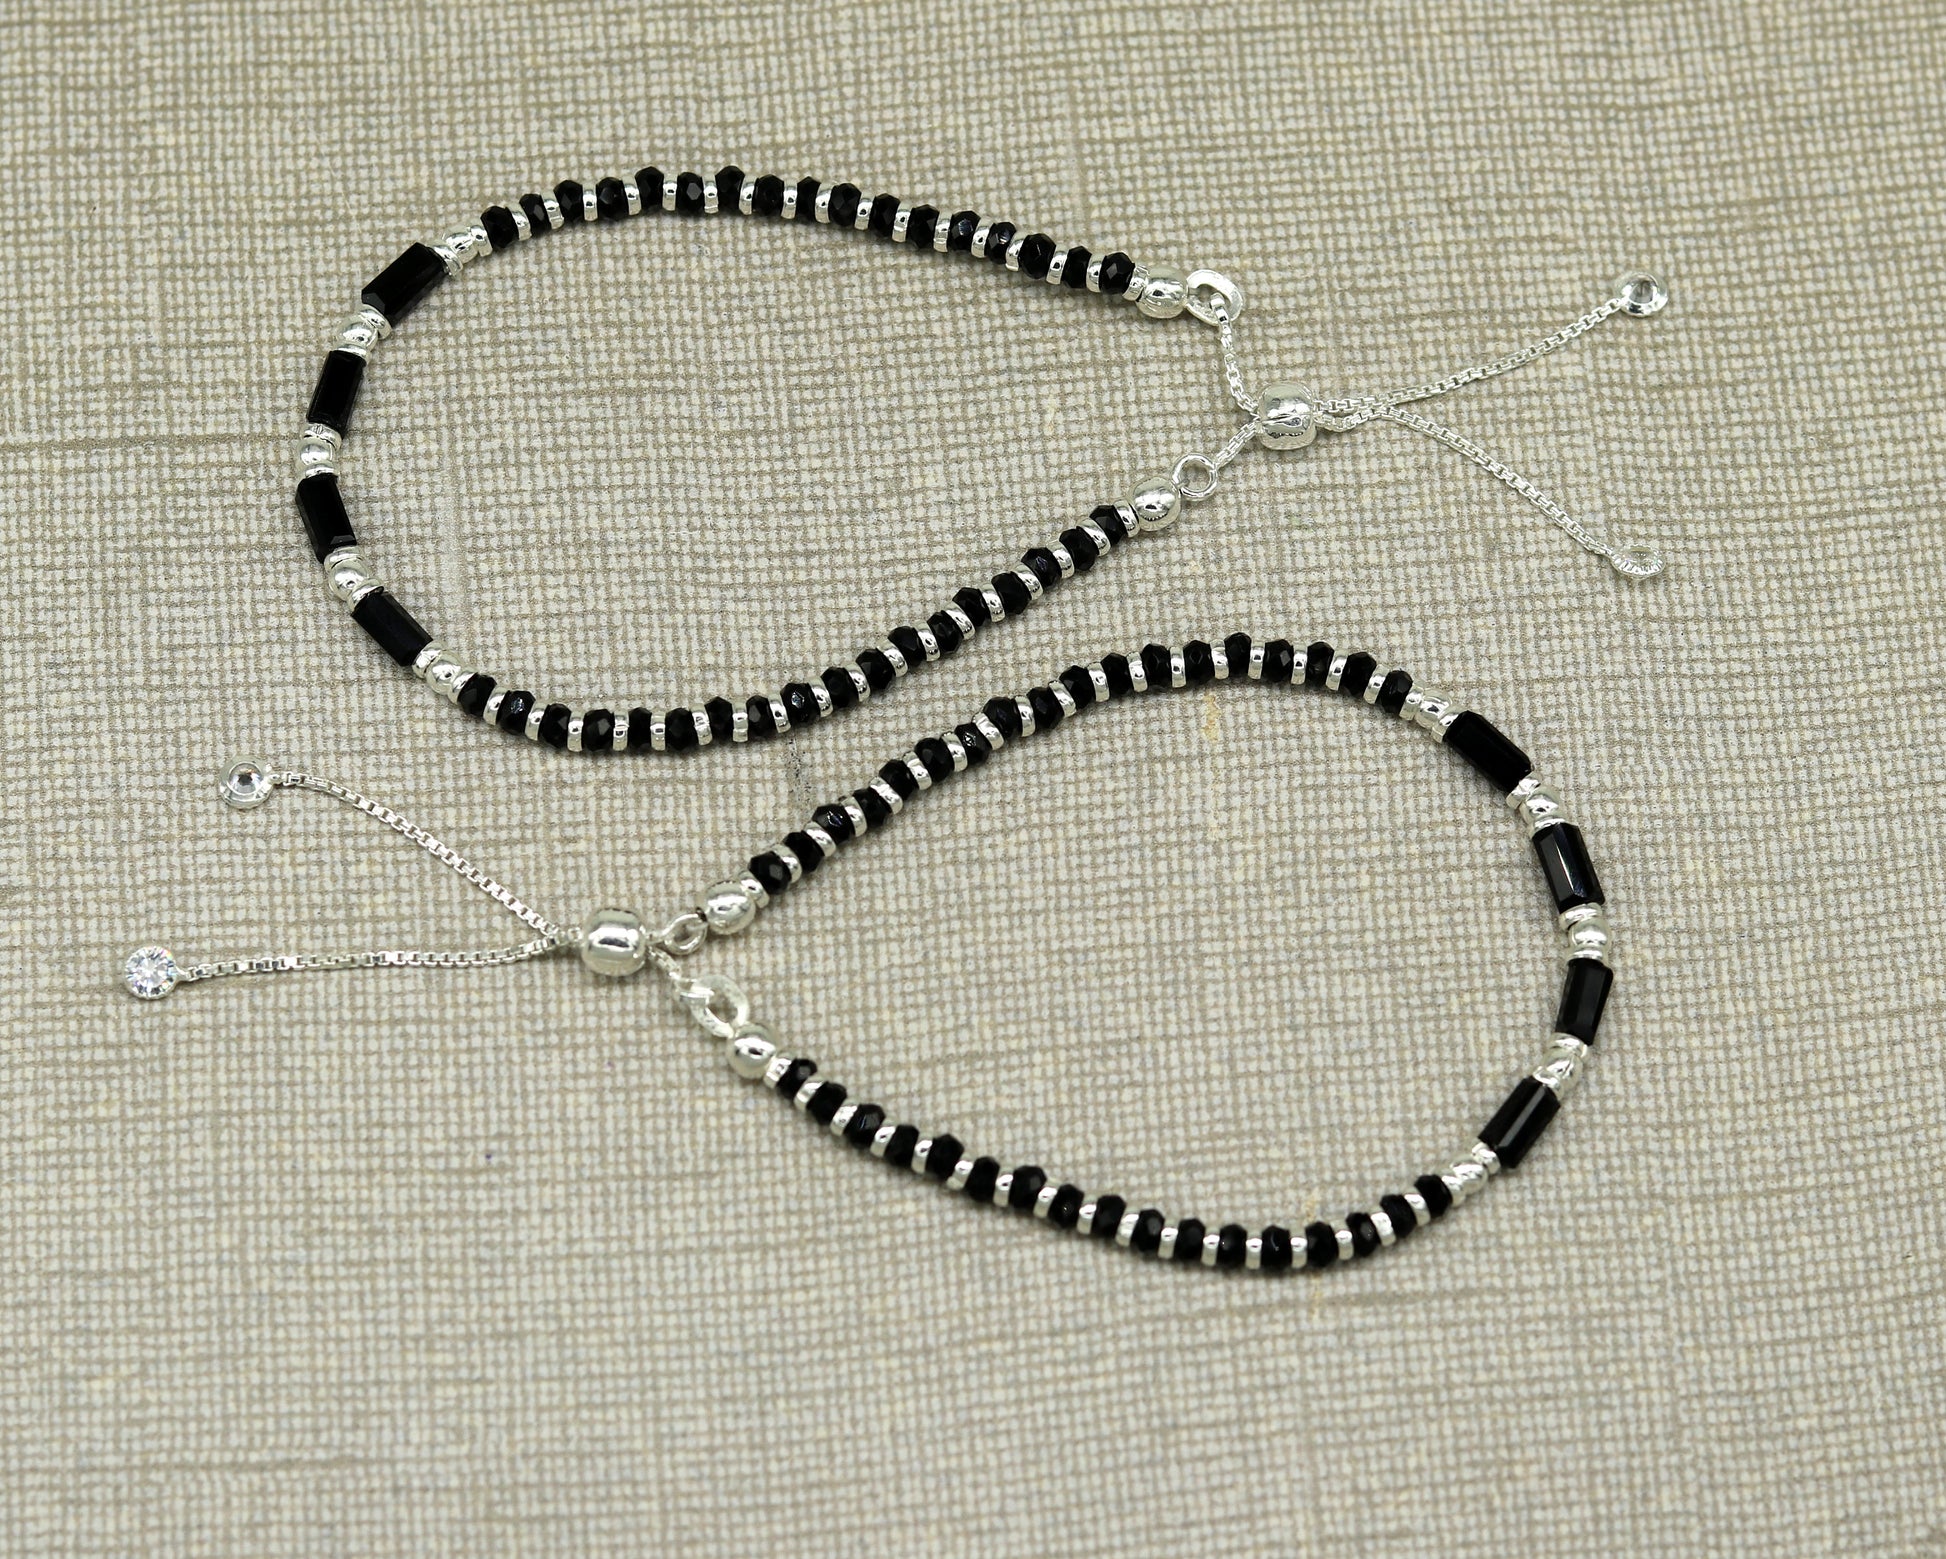 7 inches long handmade 925 sterling silver fabulous silver beads, black stone charm adjustable customized single bracelet for girl's gifting sbr170 - TRIBAL ORNAMENTS